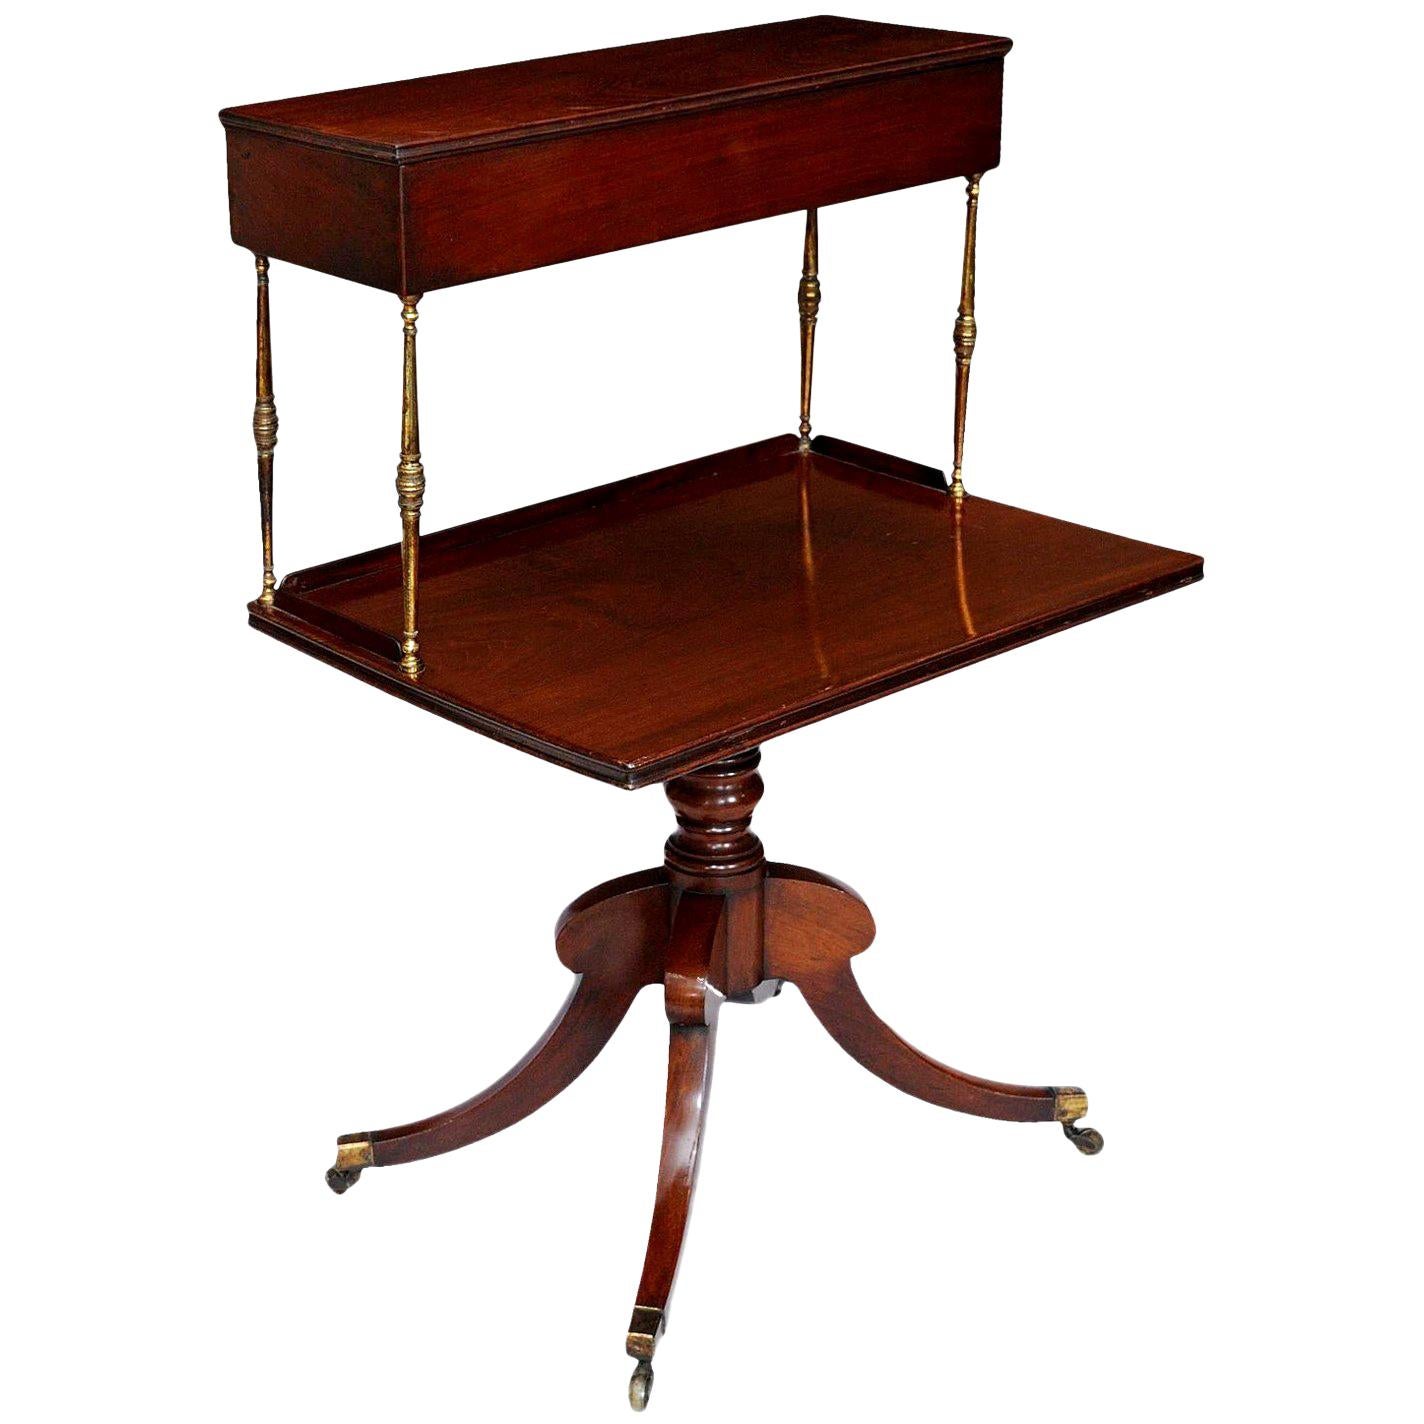 English Regency Mahogany and Gilt Brass Oyster Table, circa 1810 For Sale